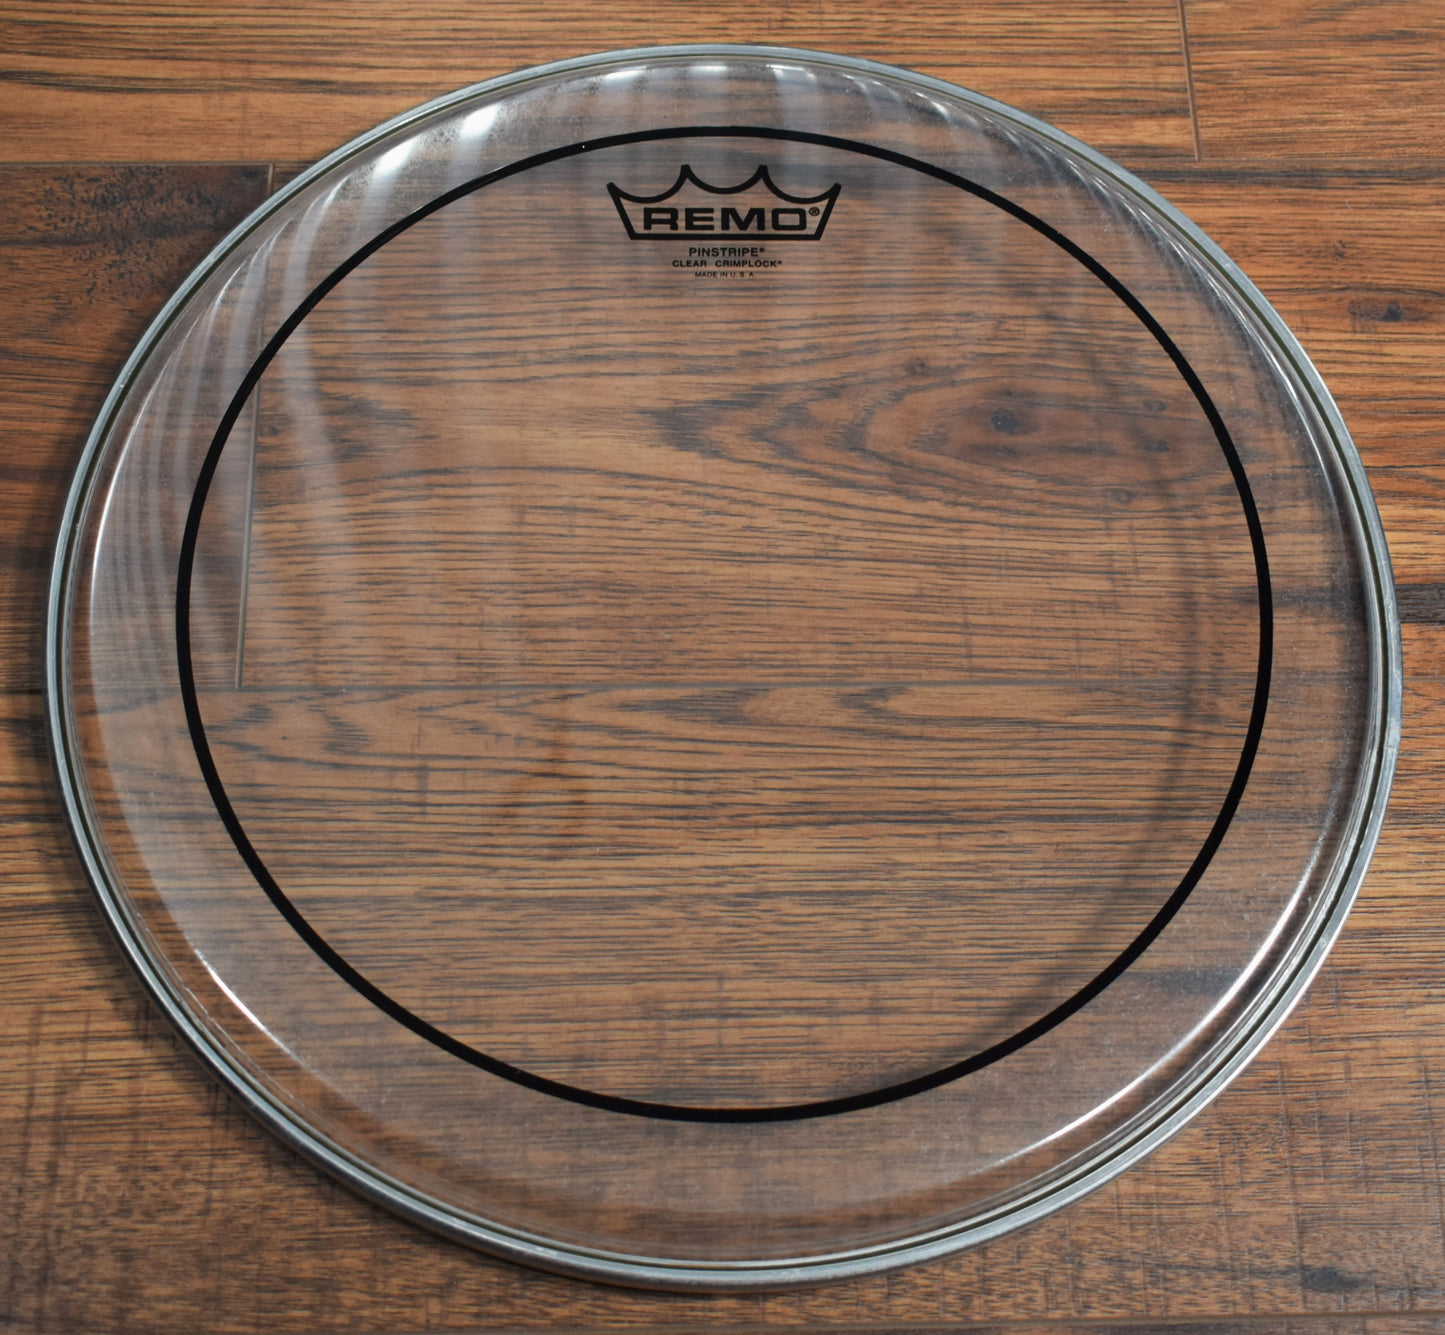 Remo PS-0313-MP Pinstripe Clear Crimplock 13" Batter Drumhead